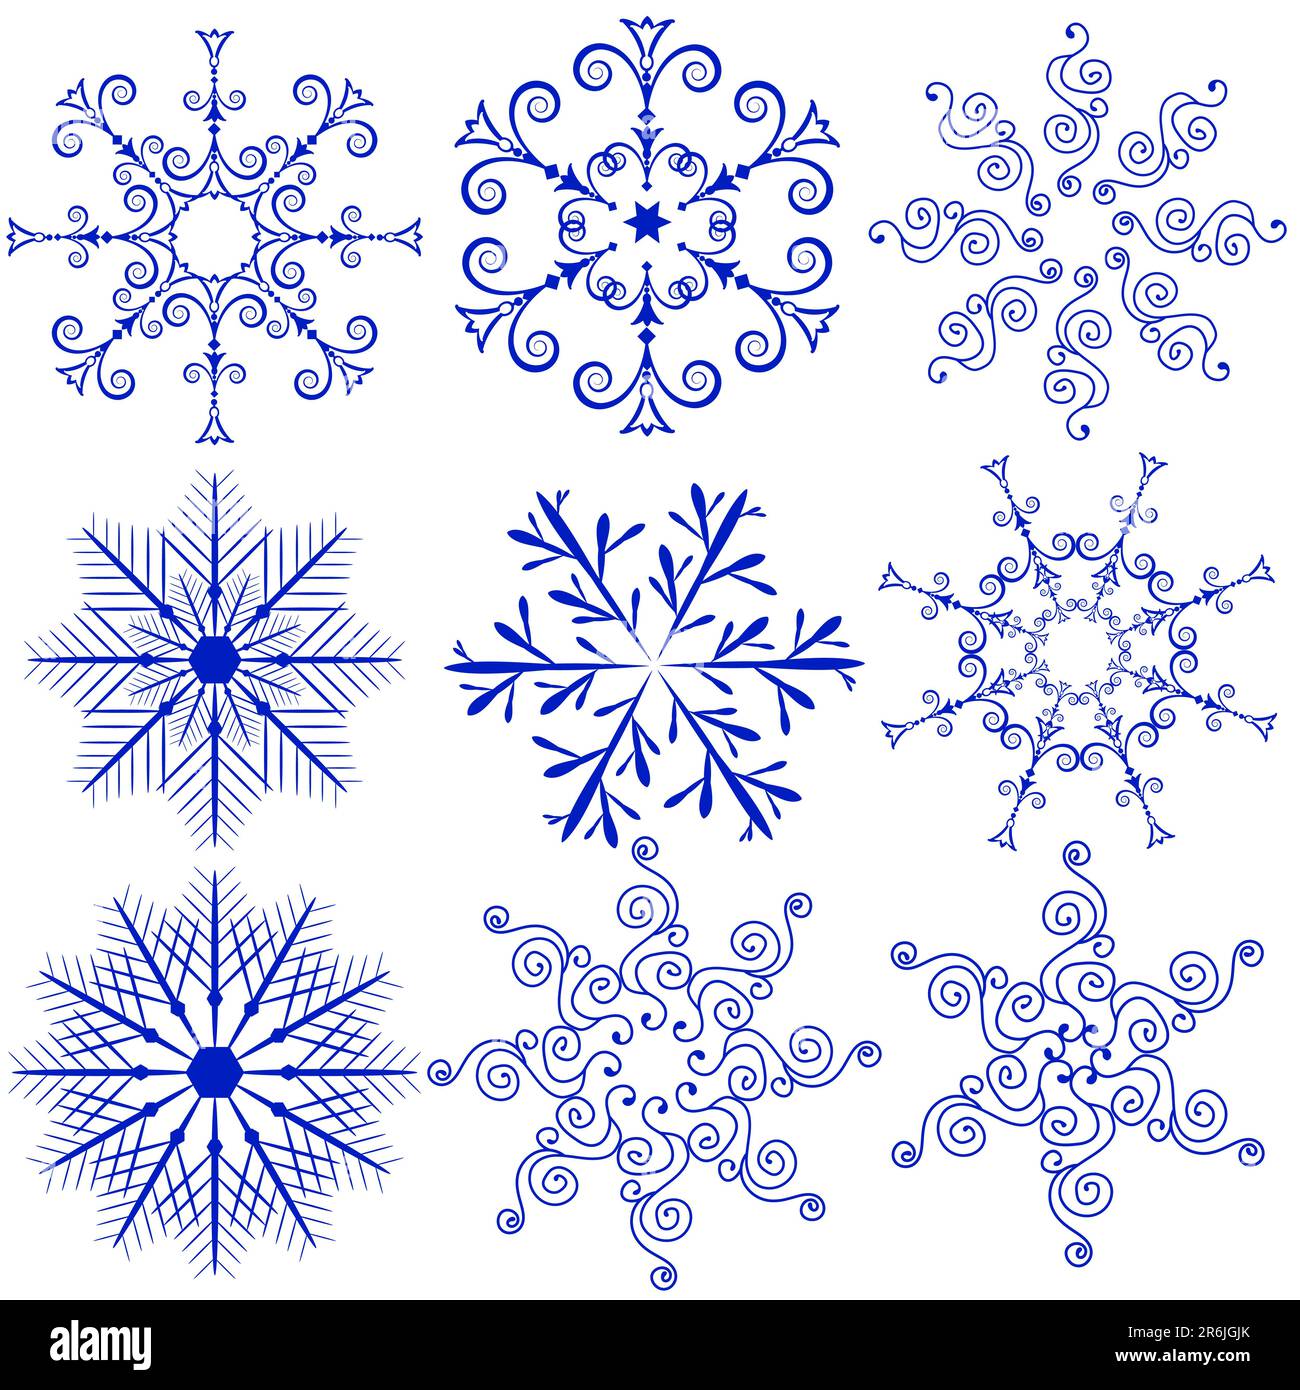 Doodle snowflakes. Variations of winter blue symmetrical snow